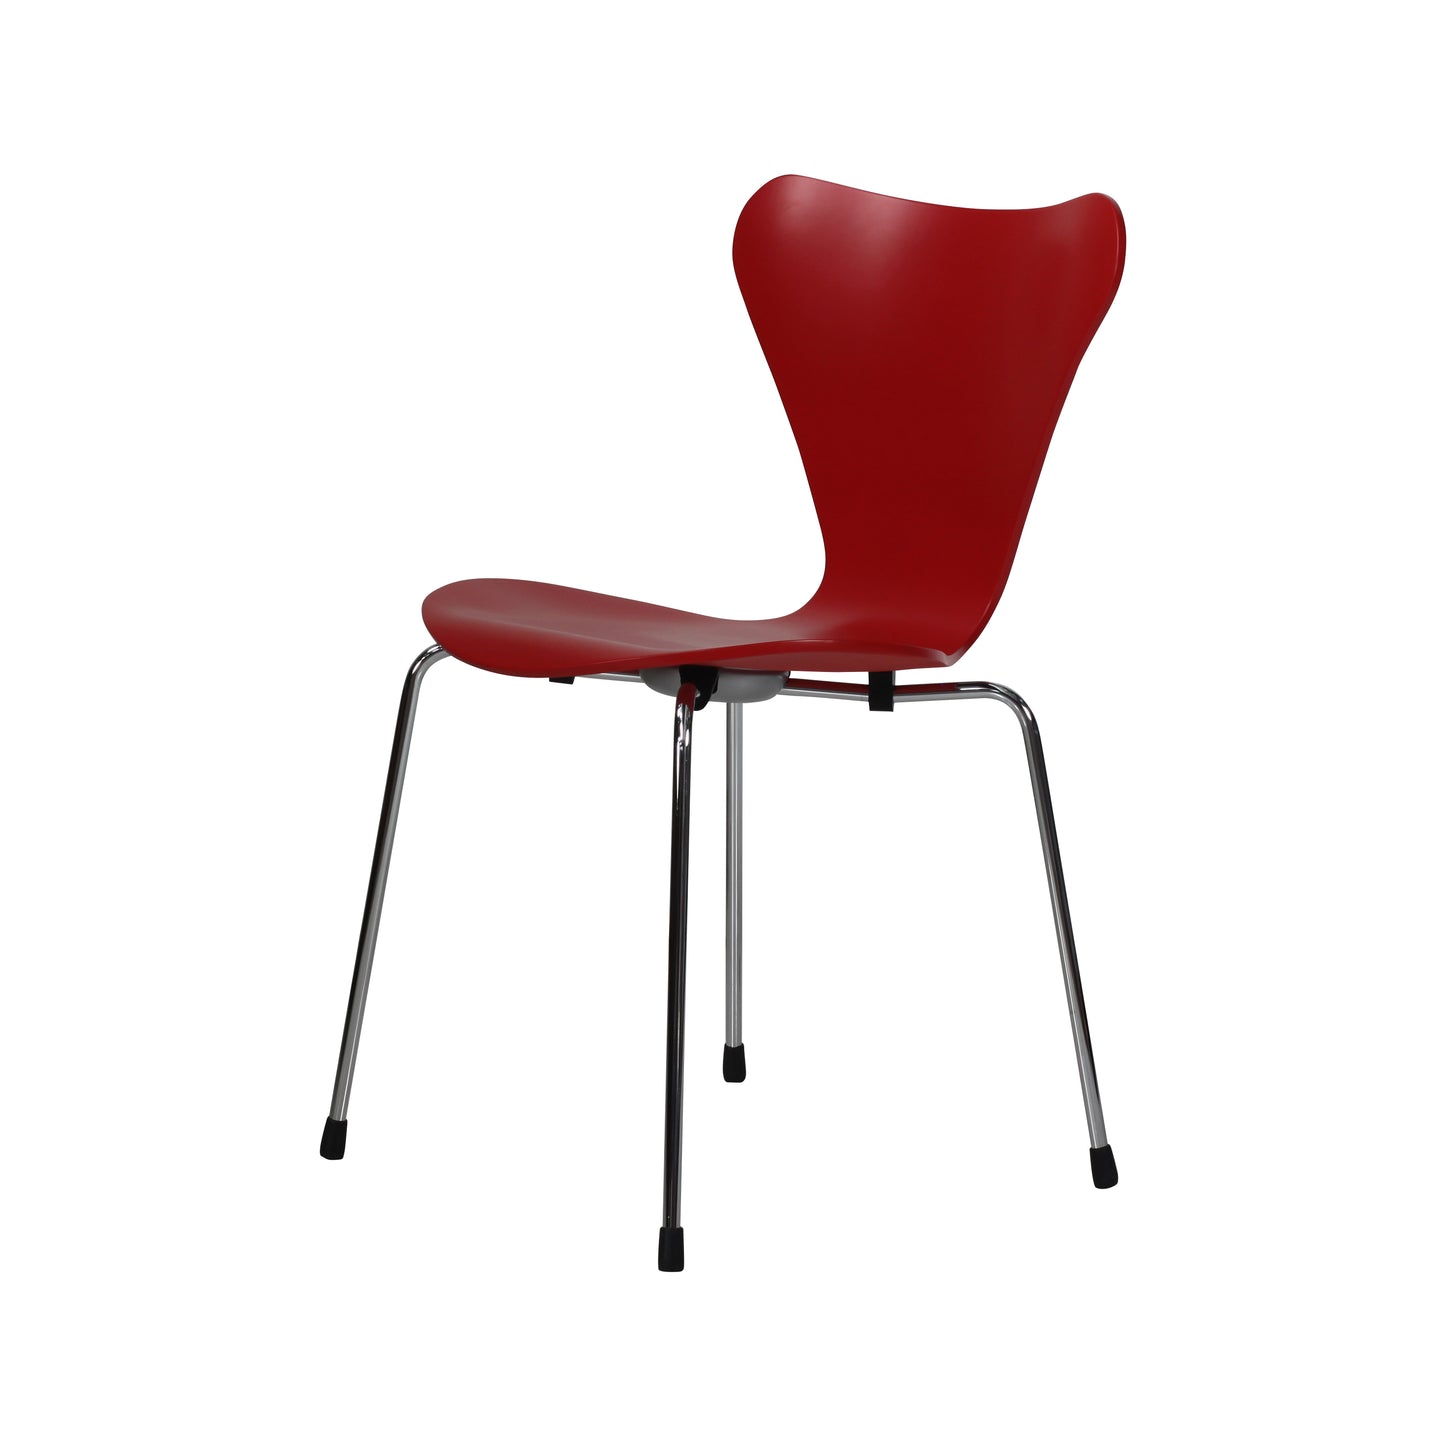 Jacobsen stackable chair | Red | Side